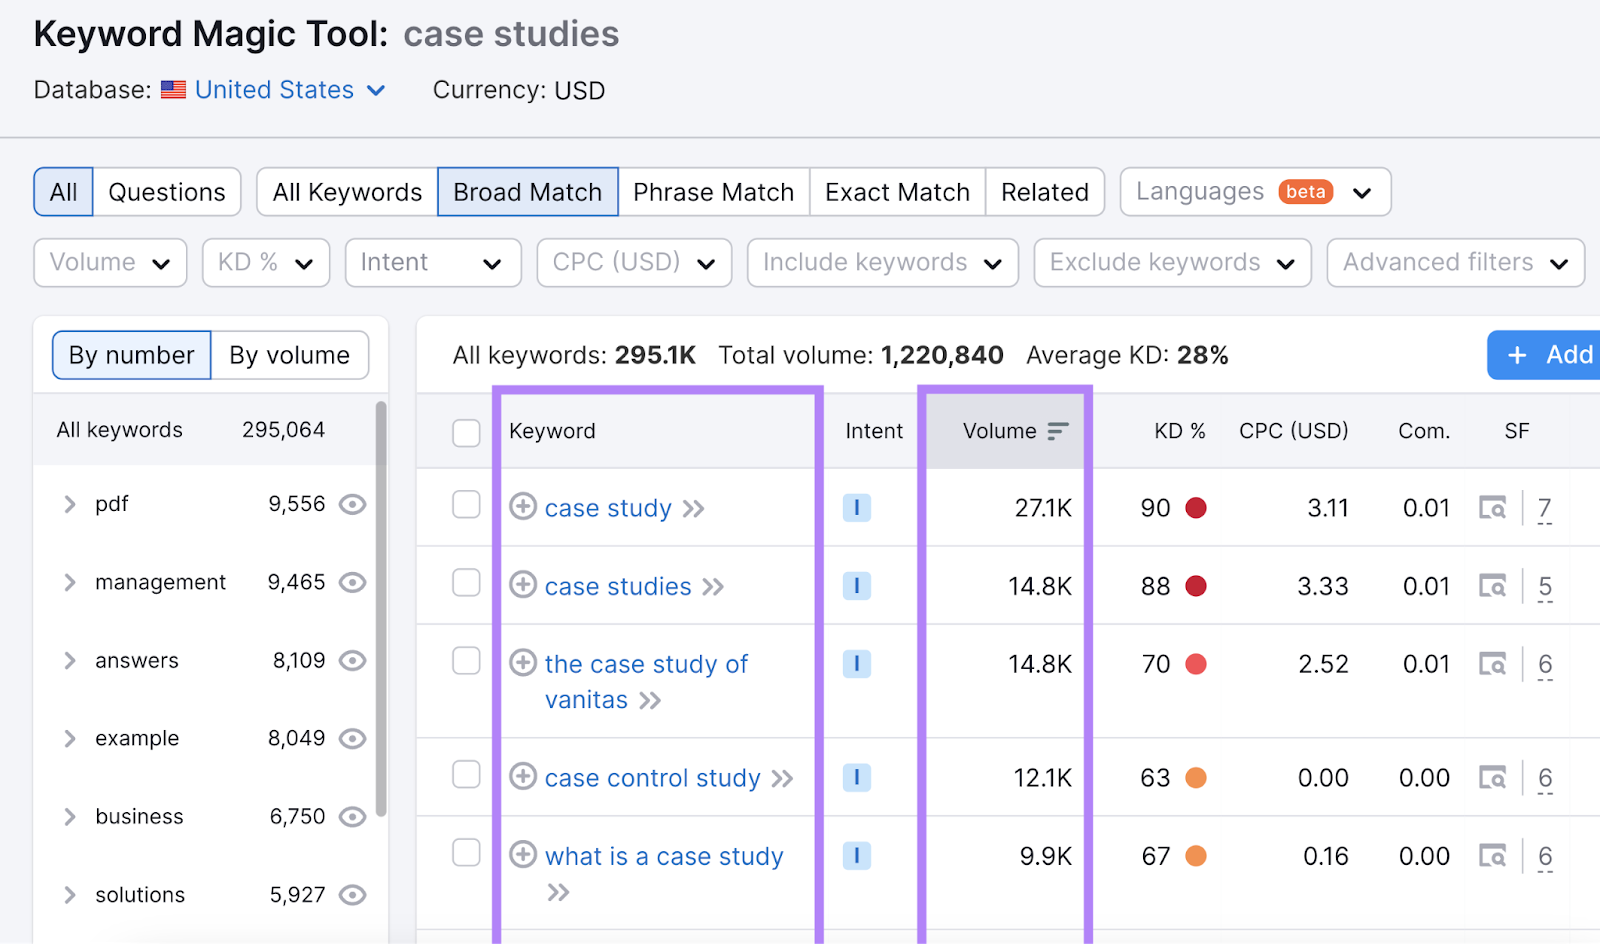 A list of keywords related to "case studies" in Keyword Magic Tool